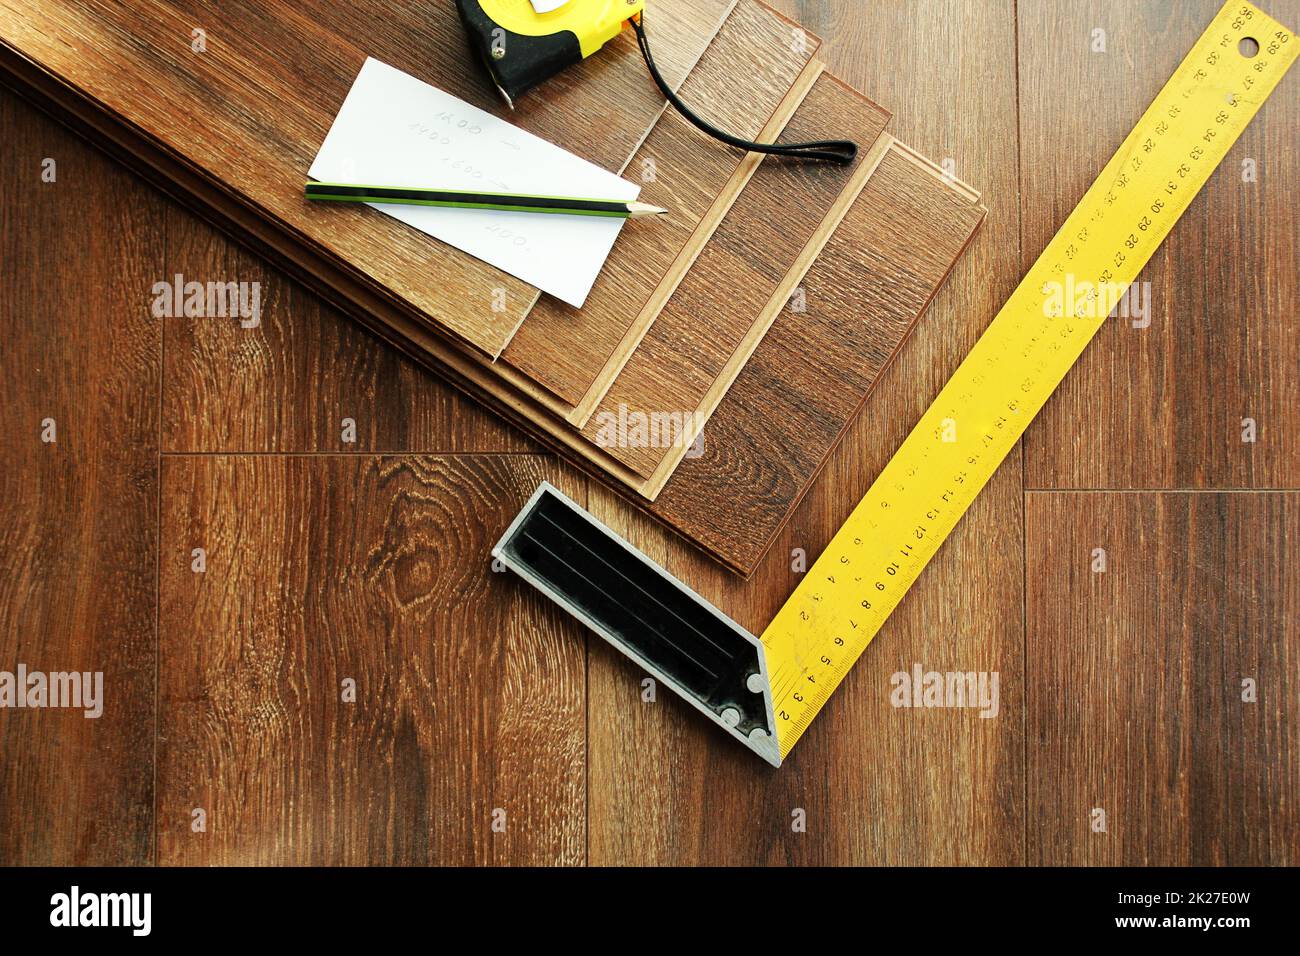 Laminate floor planks and tools on wooden background. Top view. Stock Photo